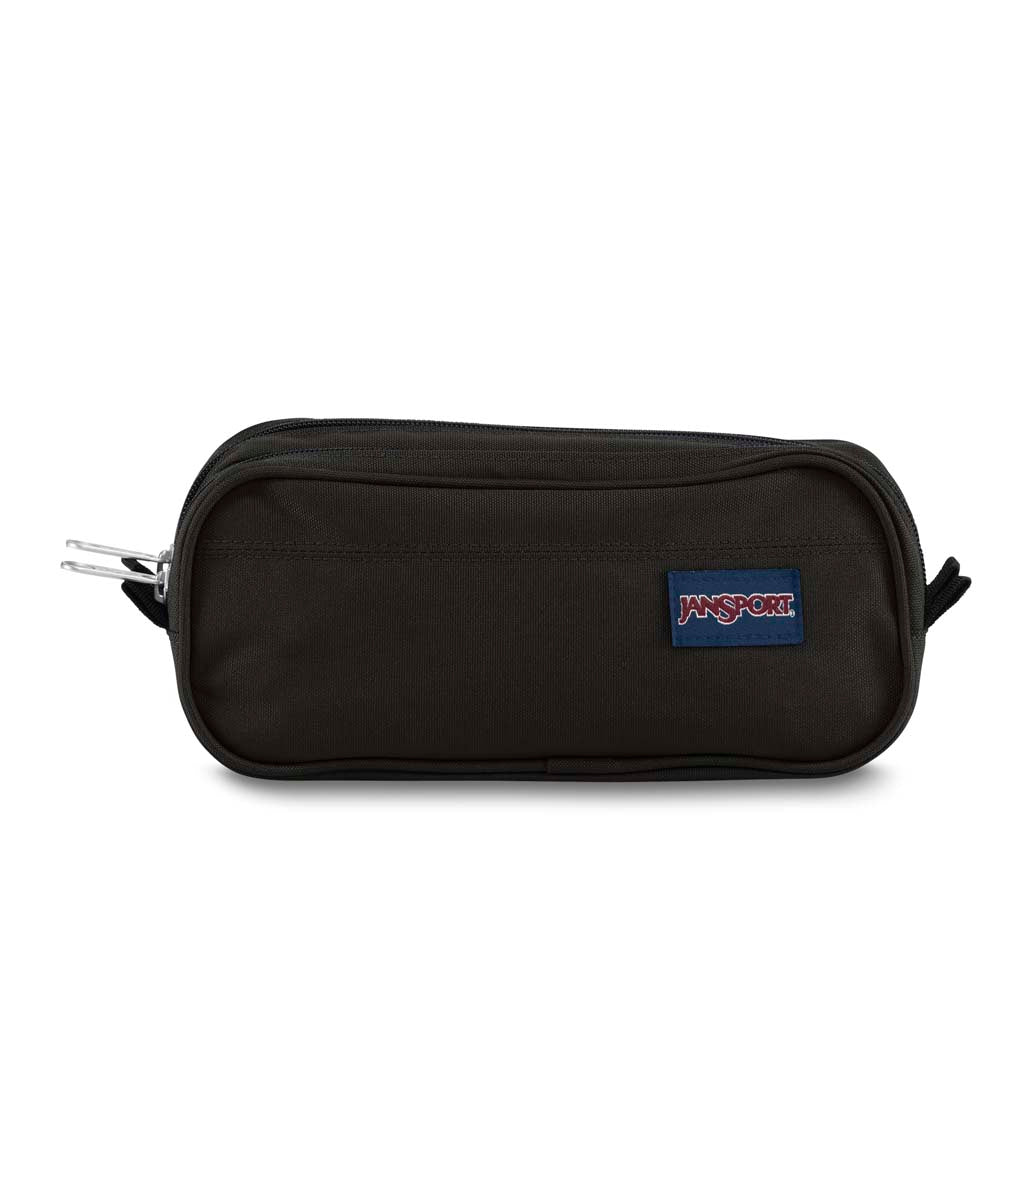 LARGE ACCESSORY POUCH - Black